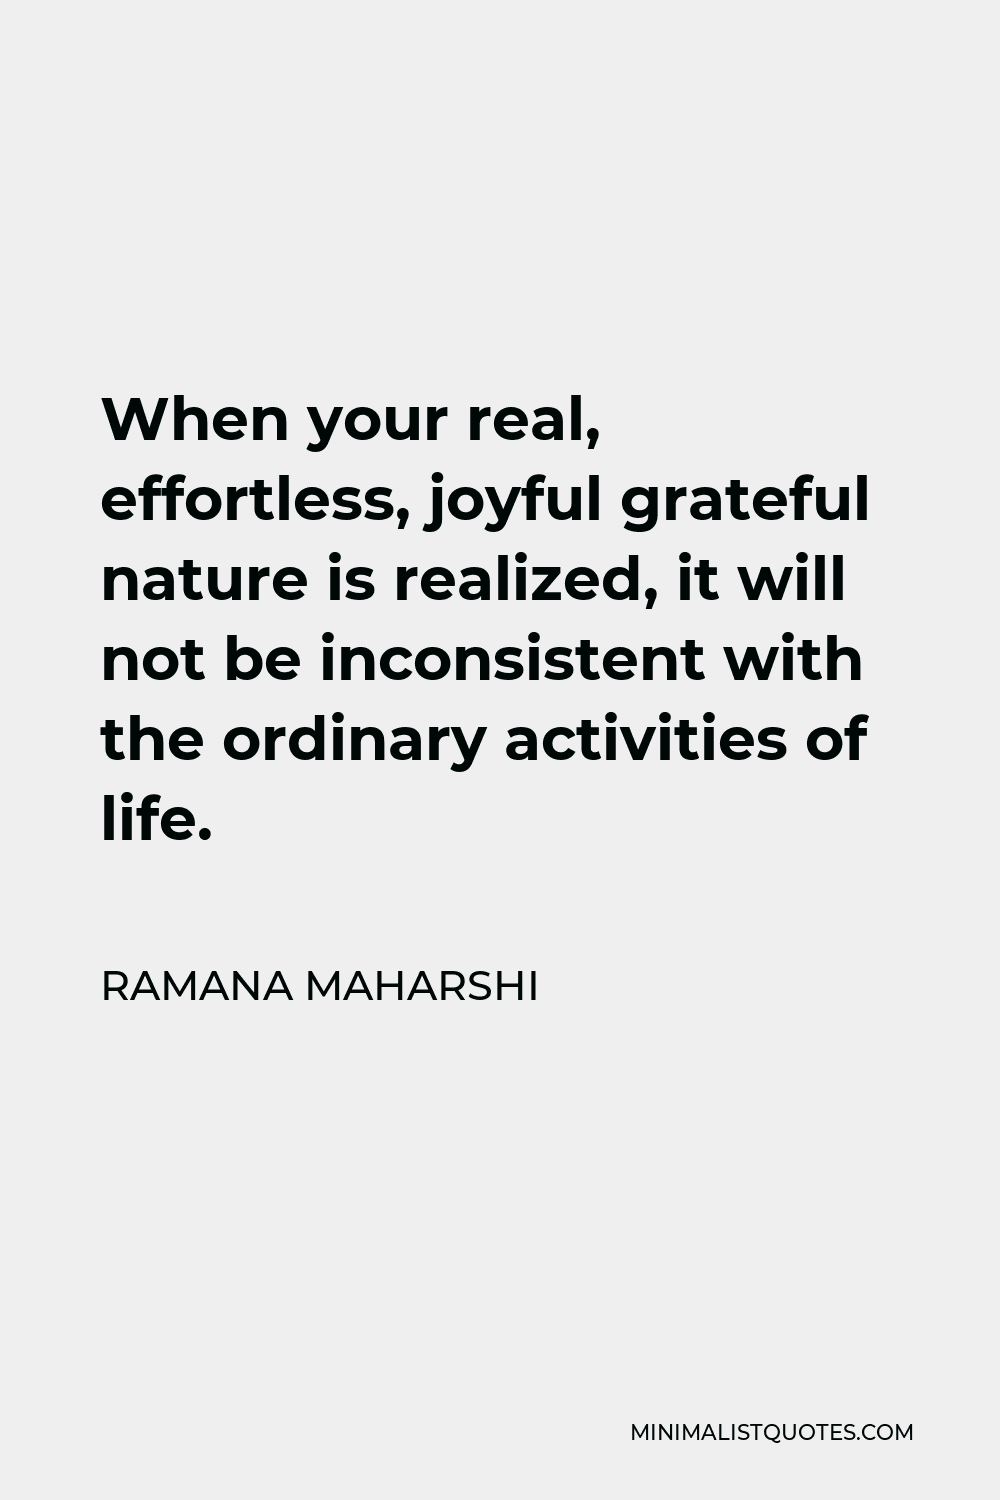 Ramana Maharshi Quote - When your real, effortless, joyful grateful nature is realized, it will not be inconsistent with the ordinary activities of life.